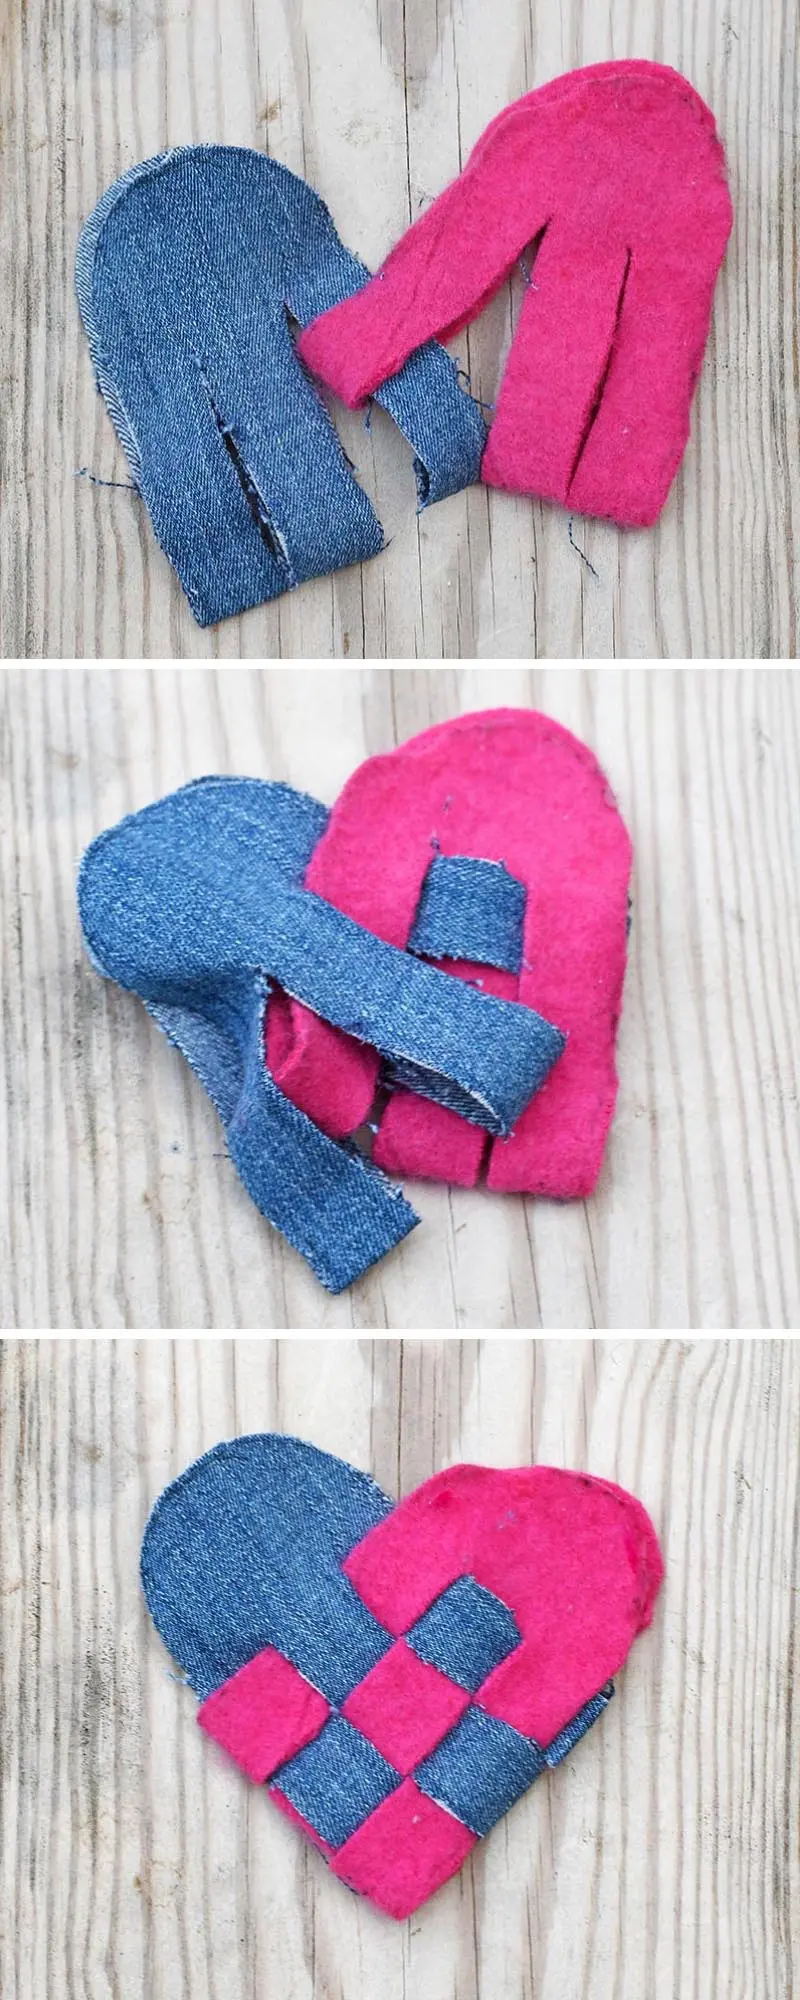 Making upcycled woven scandinavian hearts for decoration